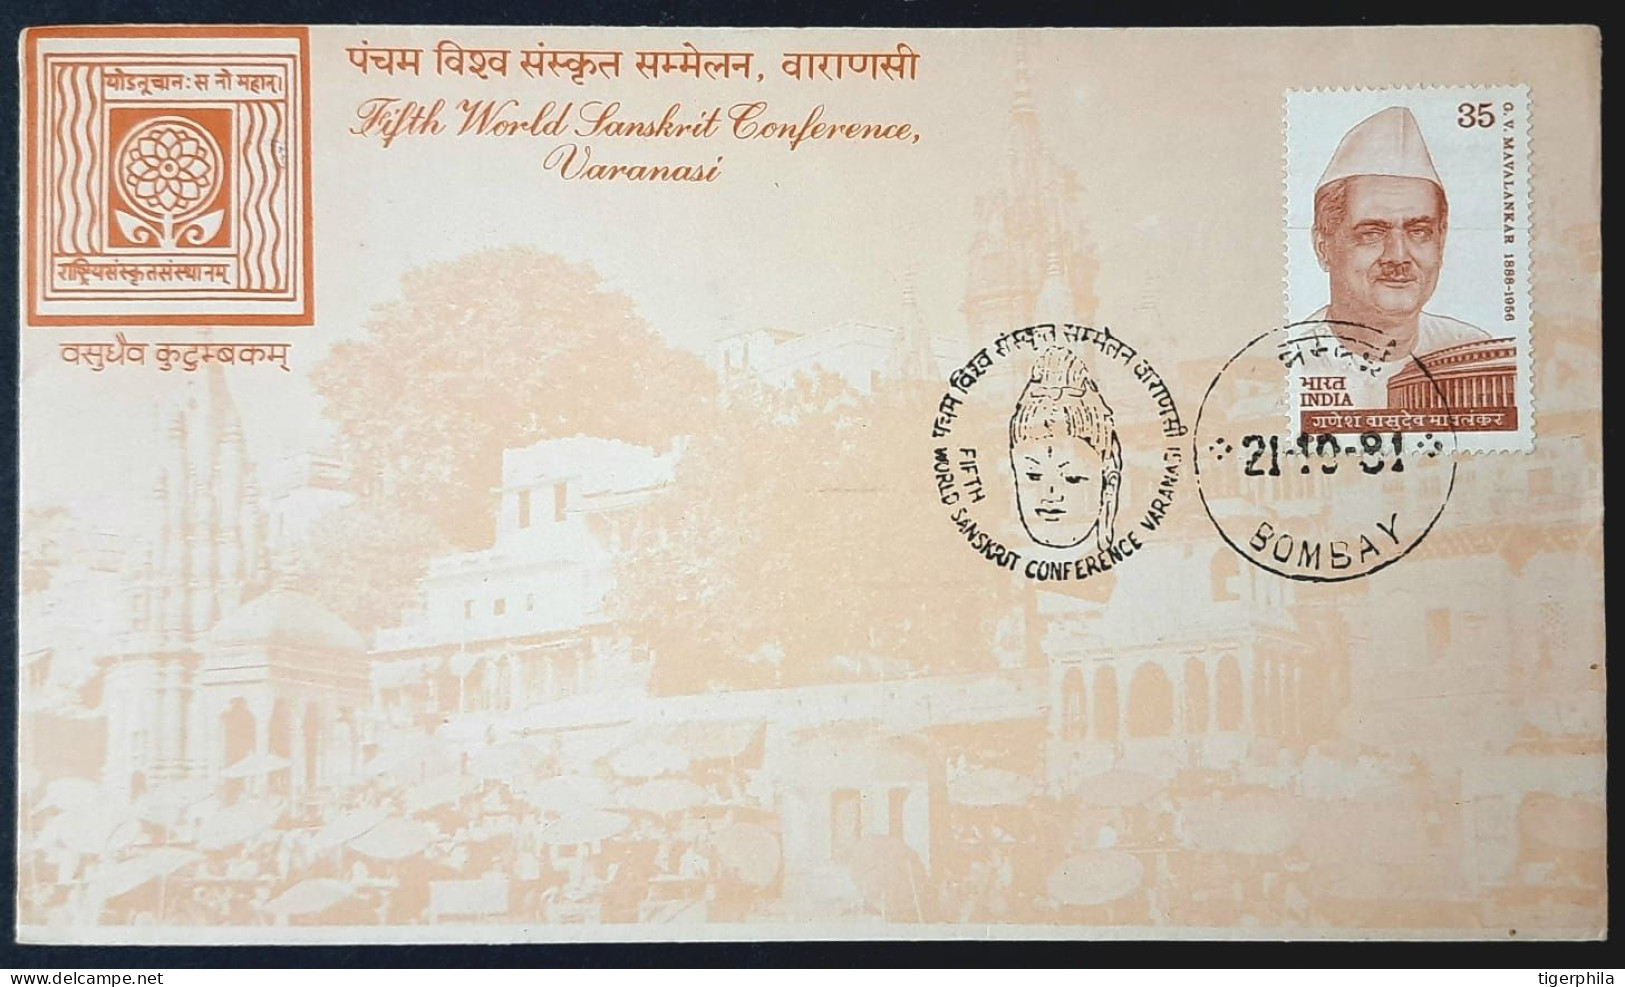 21st October 1981 Fifth World Sanskrit Conference SPECIAL COVER - Lettres & Documents